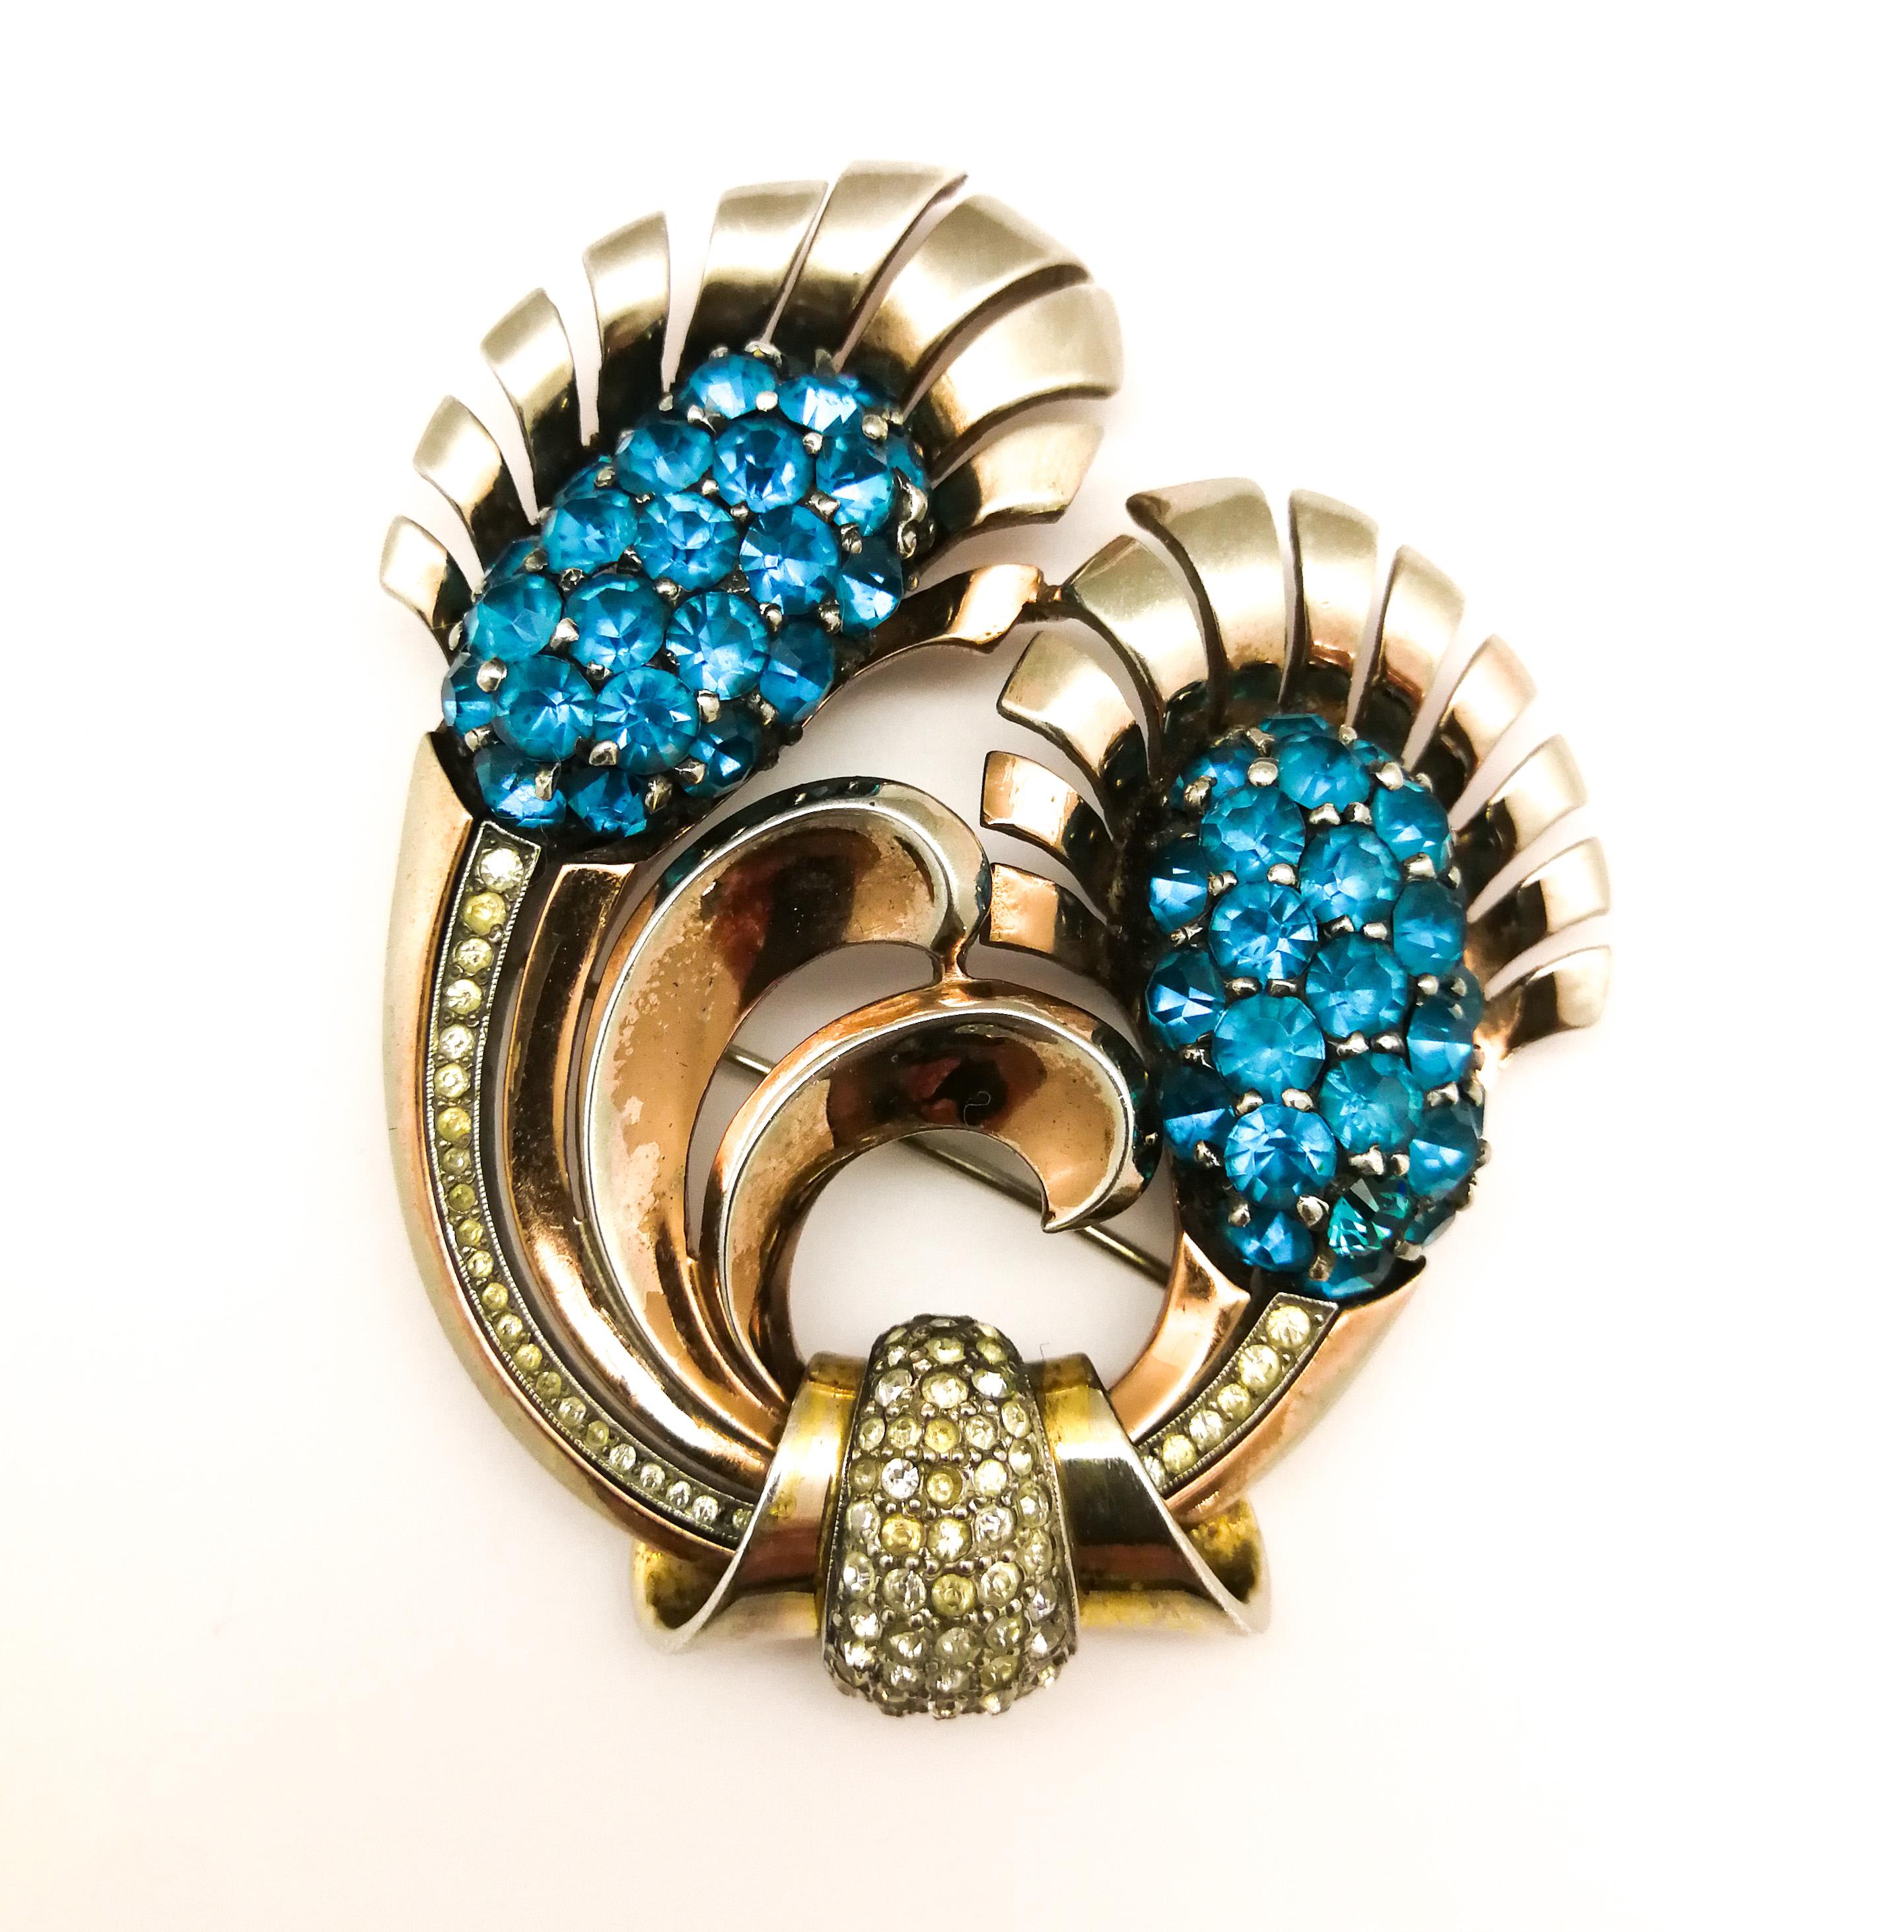 This beautifully designed and created brooch by Pennino in the 1940s epitomises the 'cocktail style' so prevalent at this time, a true flight of fancy and imagination. Beautifully executed in sterling silver, with a gold wash, the unique blue stones